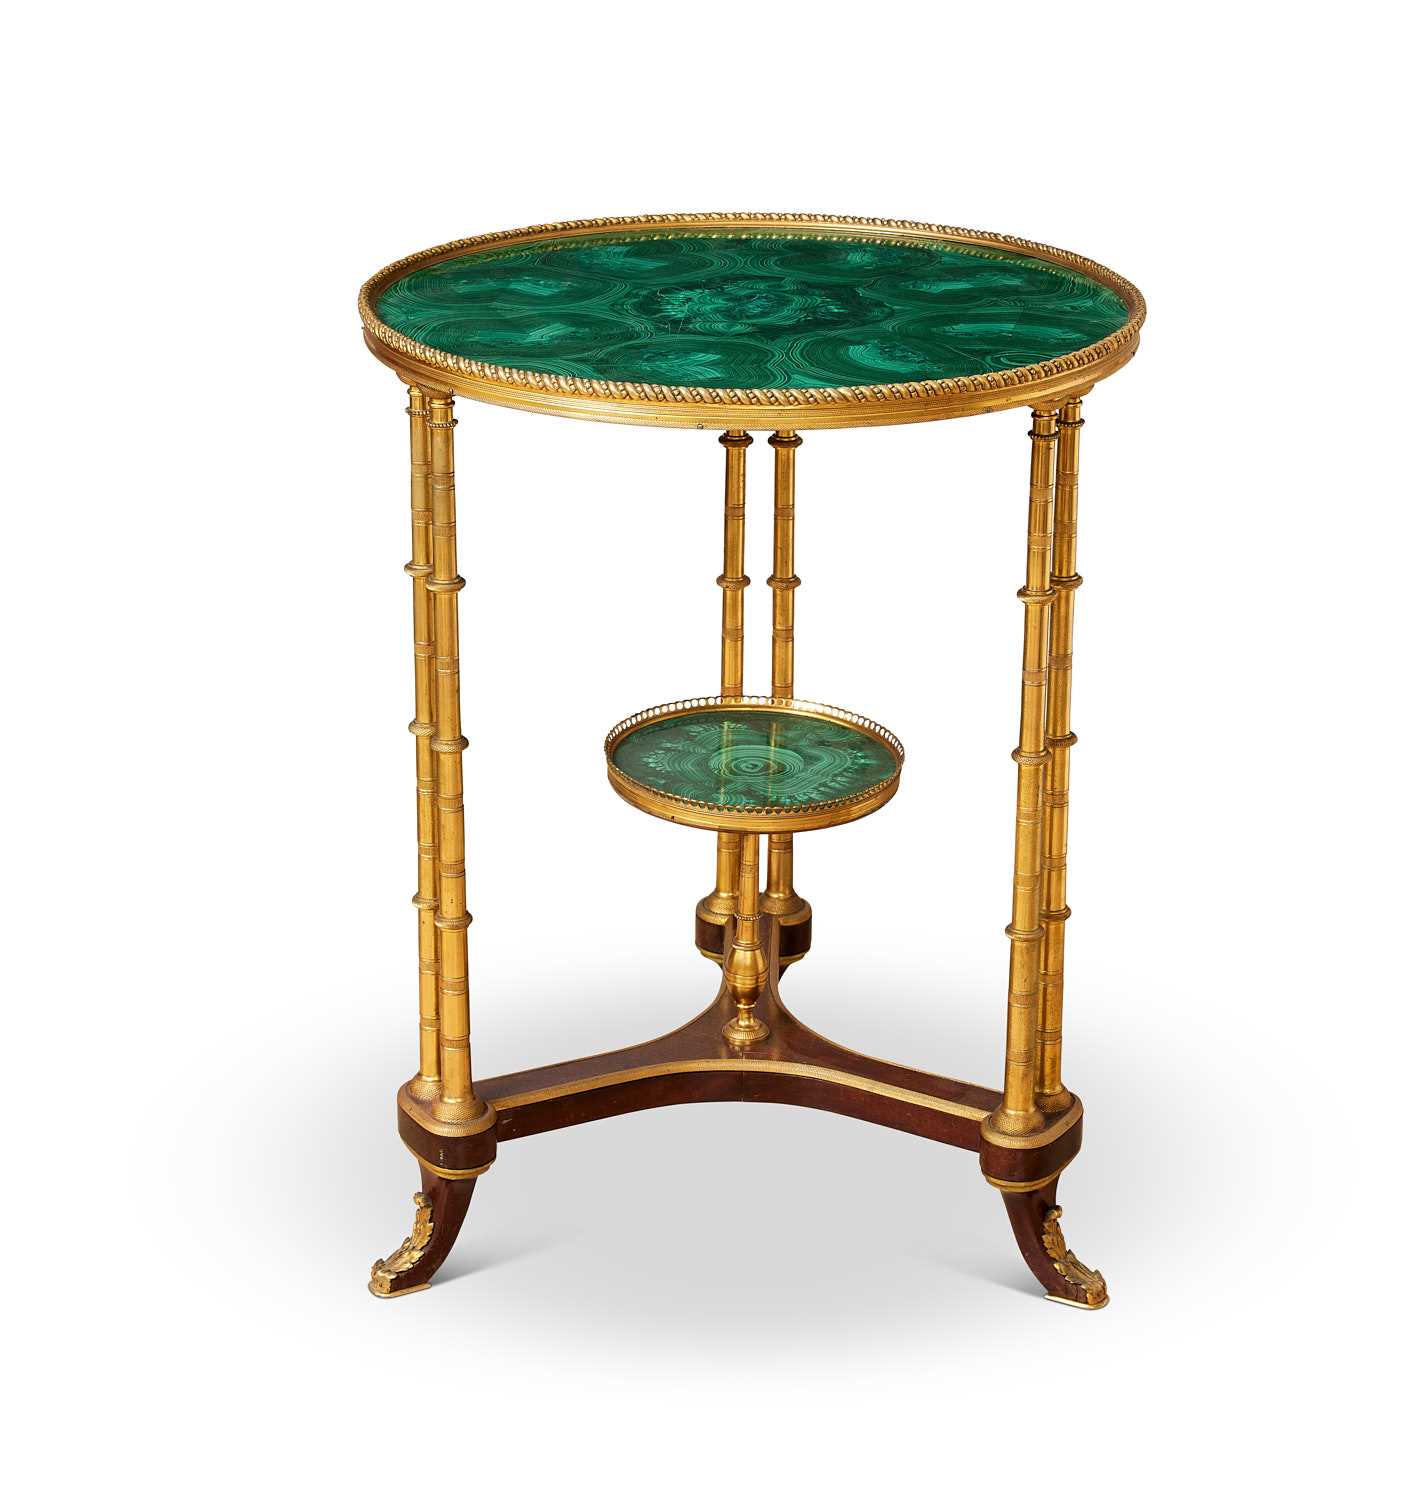 A FINE EARLY 20TH CENTURY MALACHITE AND ORMOLU MOUNTED TABLE - Image 2 of 4